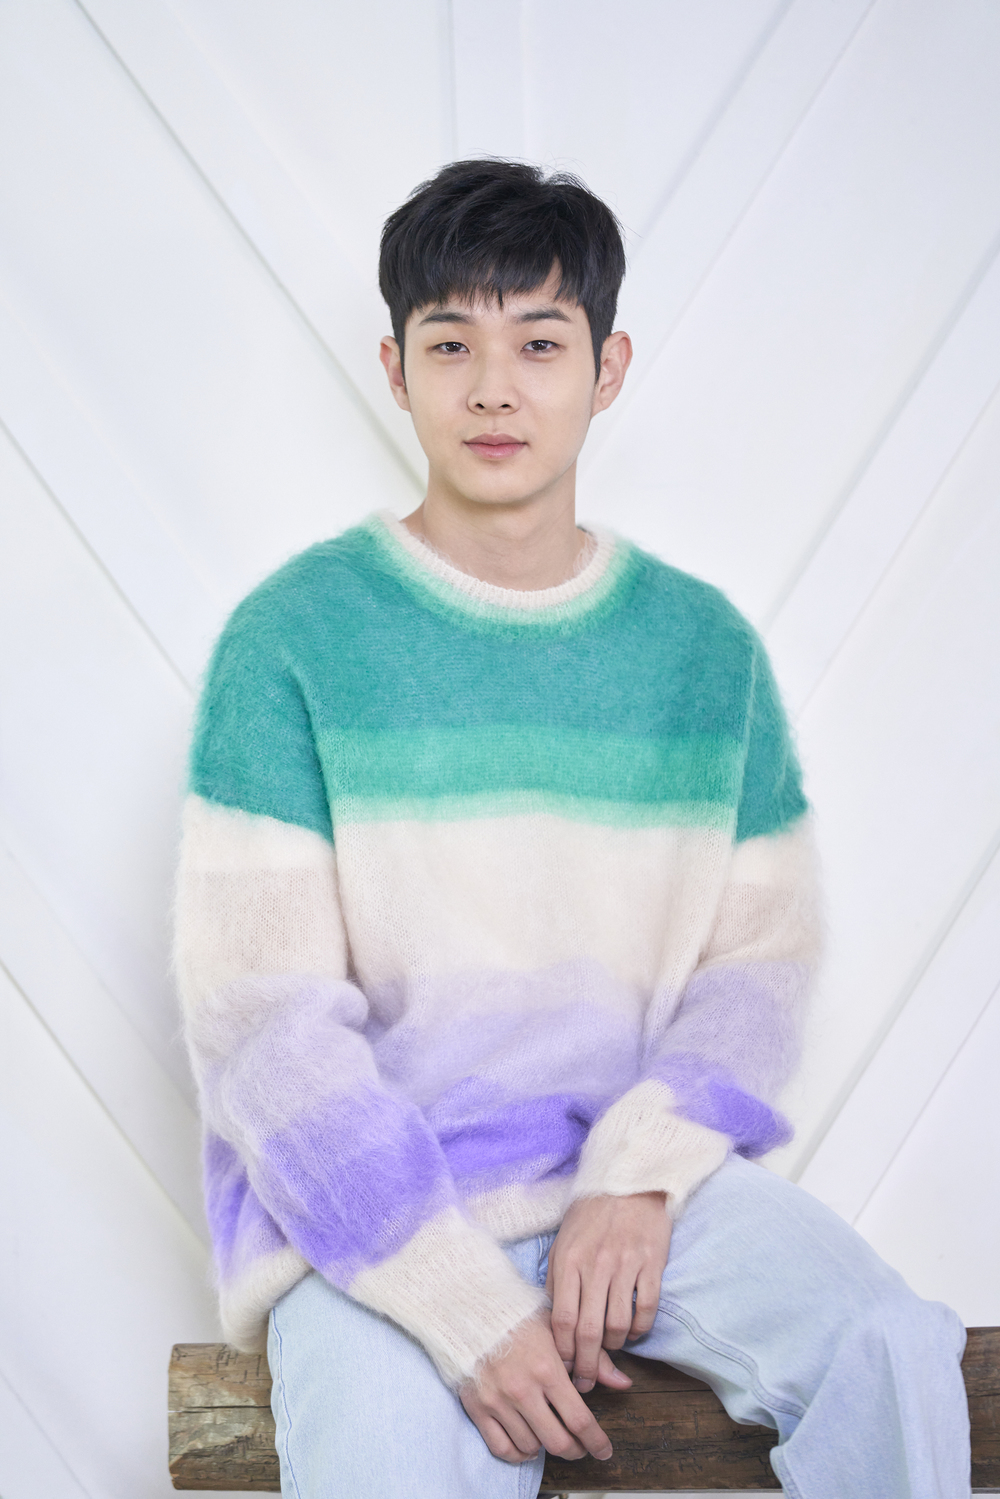 Choi Woo-shik has vividly responded to Best Friend Park Seo-joon, V, and Park Hyung-sik who saw Time of Hunting.Choi Woo-shik, who starred in the film Time of Hunting (director Yoon Sung-hyun), revealed his impressions of showing the movie through the video interview on April 29.Time of Hunting is a chase thriller that captures the time of four friends who planned dangerous operations for a new life, an unidentified pursuer who chases them, and their breathtaking hunting. It was released simultaneously to more than 190 countries around the world on April 23 through Netflix.As for the occasion of the appearance, Choi Woo-shik said, When I choose a work, I think about the process. I am very excited about what process I will experience with these people.It was the biggest thing to do with Lee Jae-hoon, Ahn Jae-hong, Park Jung-min, and Park Hae-soo, and there was a lot of curiosity about Yoon Sung-hyun because he enjoyed the watchman .I was curious because my colleagues liked it so much, and I wanted to see the finished version of the work. I was looking forward to seeing the thrill and tension. Instead of opening the theater, she was satisfied with the movie on Netflix.Choi Woo-shik said, Fortunately, I experienced a service called Netflix as a Okja. Since the parasite, it was a better opportunity to greet overseas people more quickly.pear hyo-ju